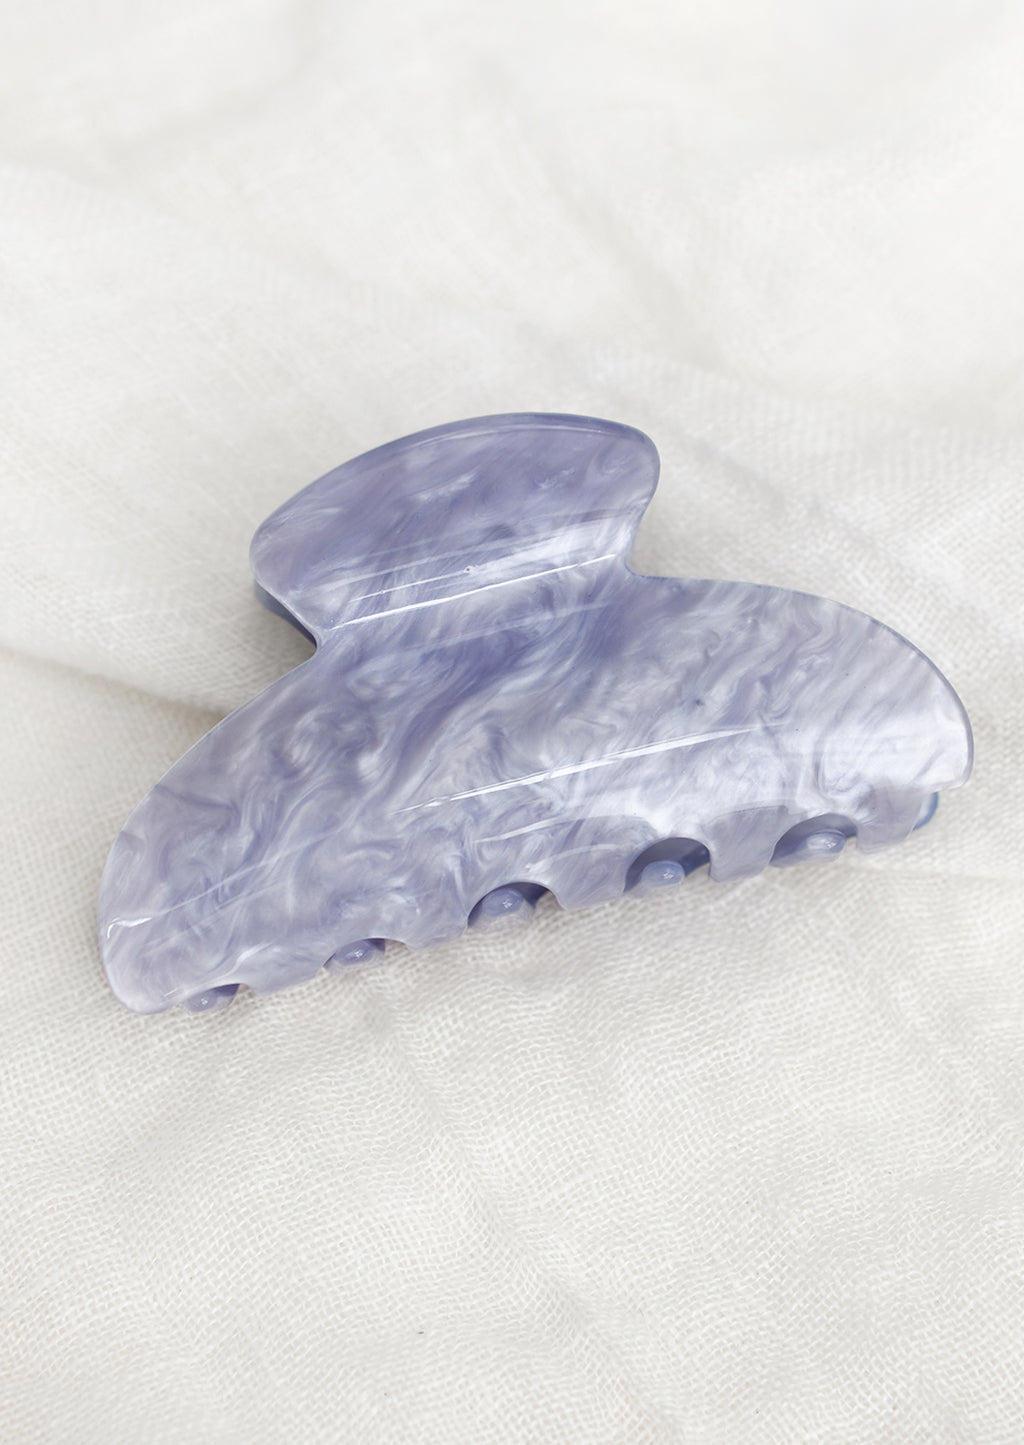 Periwinkle: A plastic hair claw in pearlized periwinkle.